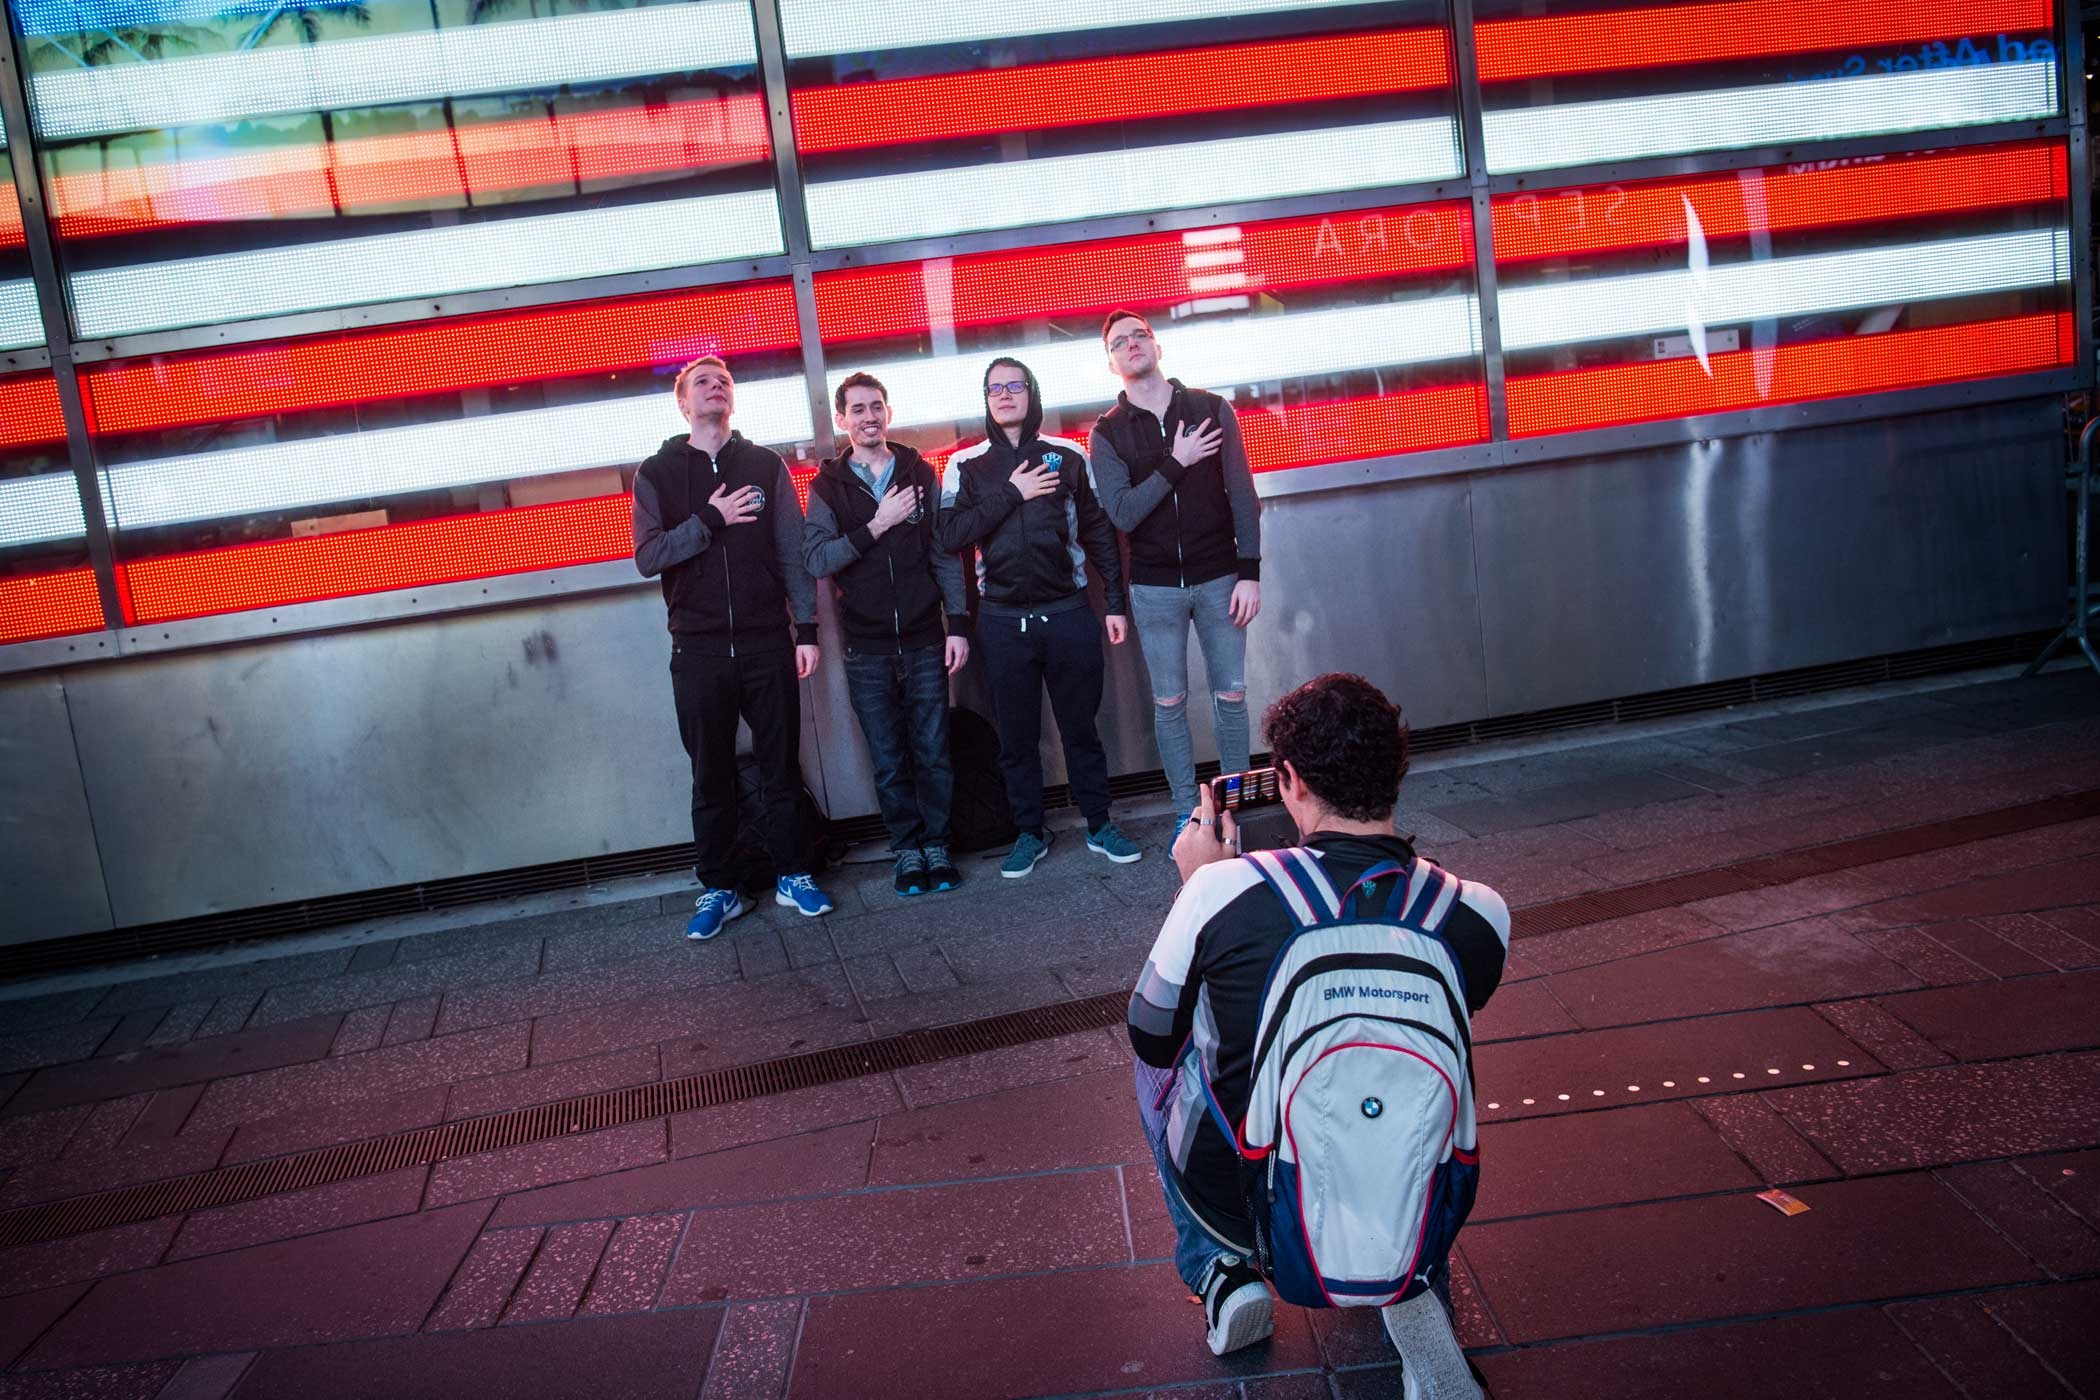 Members of H2k-Gaming stand for a photo as they walk through Times Square in New York, NY at 2AM, the day of their semifinal matchup with Samsung Galaxy for a chance to play in the League of Legends World Championship Finals. The team plays in the European region which has a friendly rivalry with North American teams, so they took this opportunity to "troll". Mark Kauzlarich for TIME